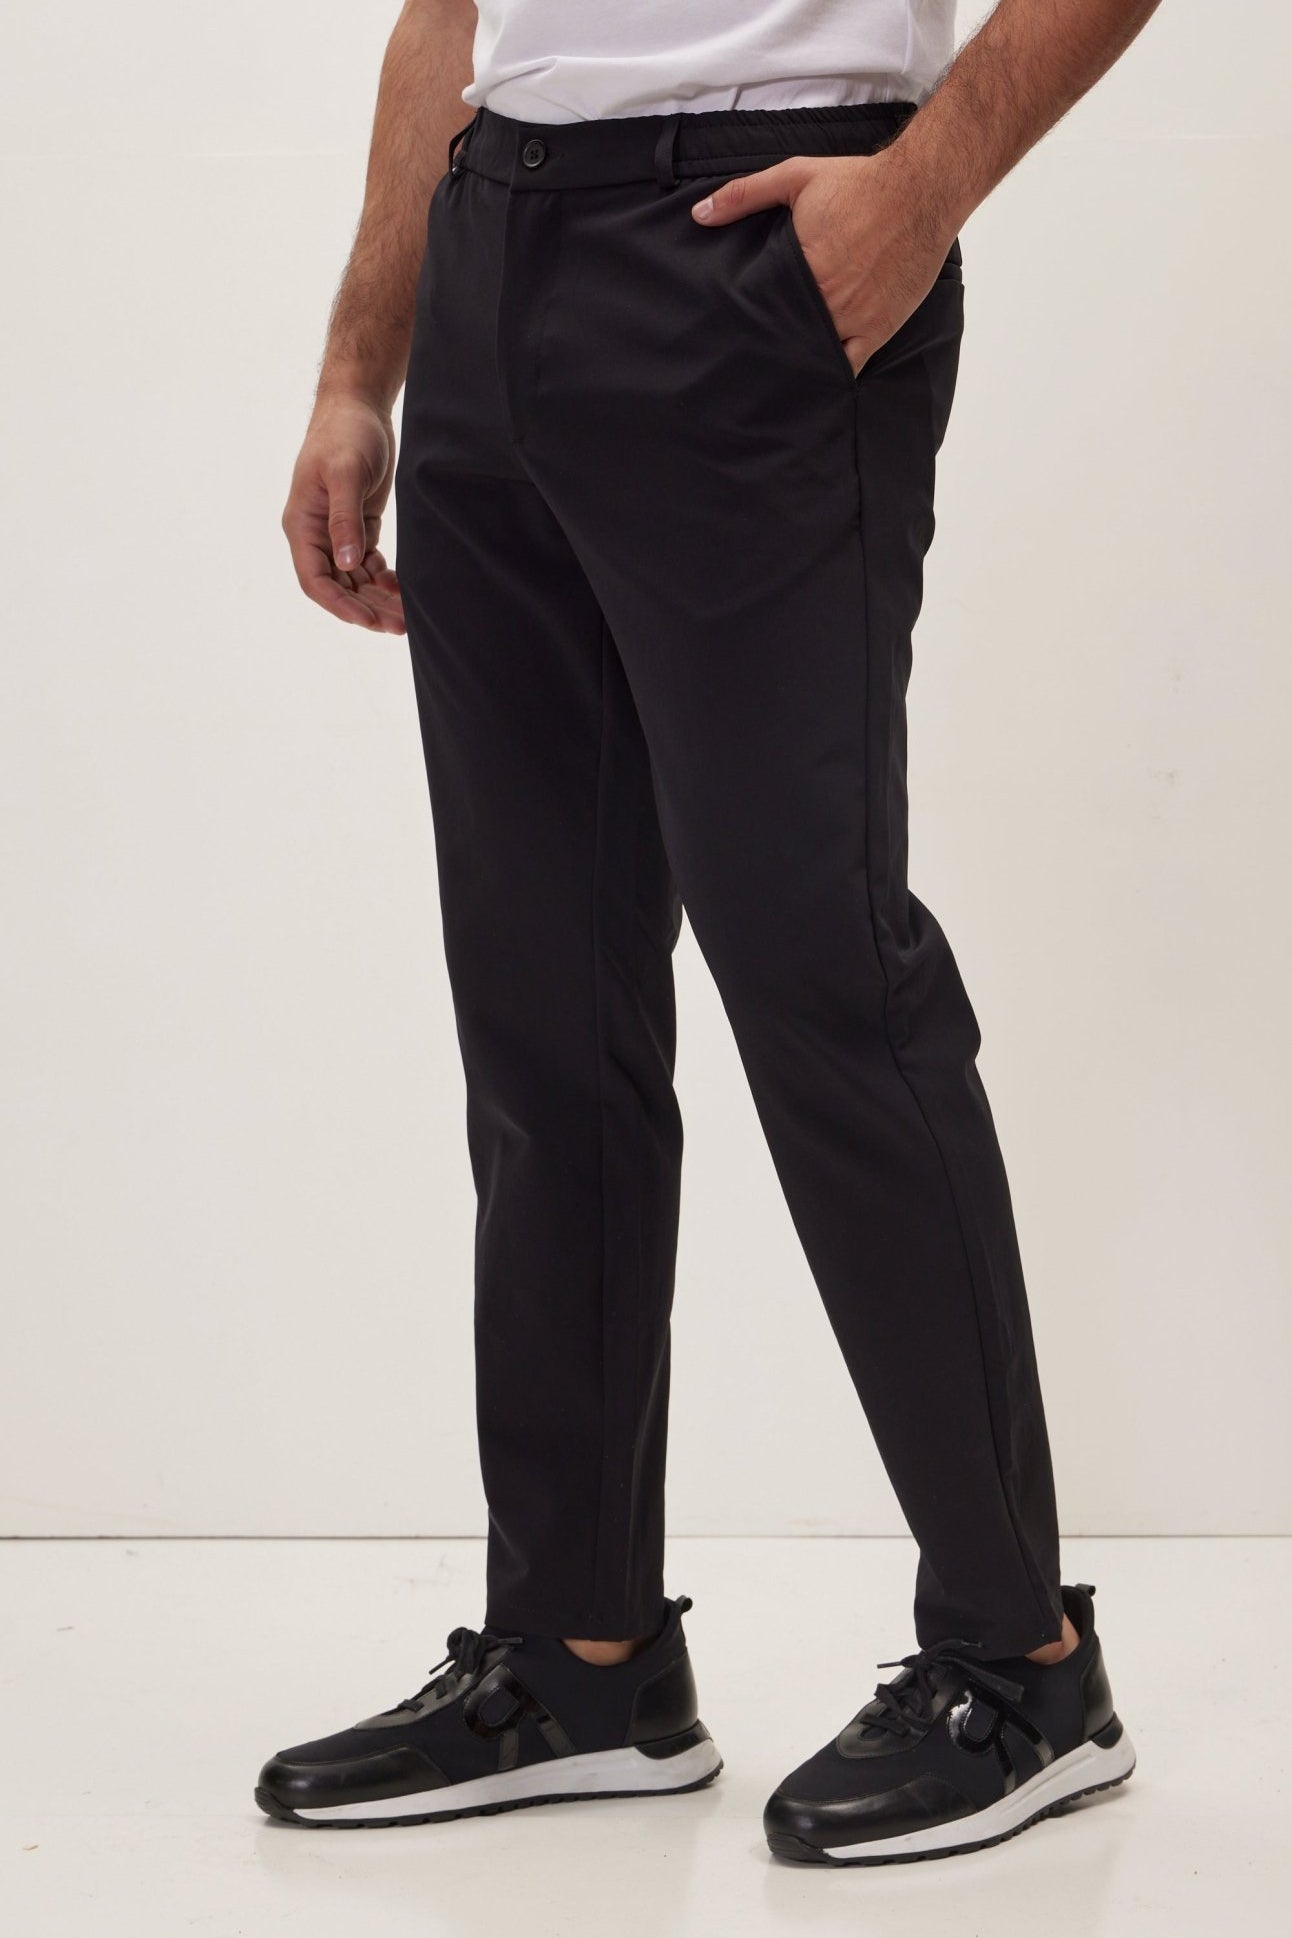 Wrinkle Free Tapered Travel Pants - Black - Ron Tomson